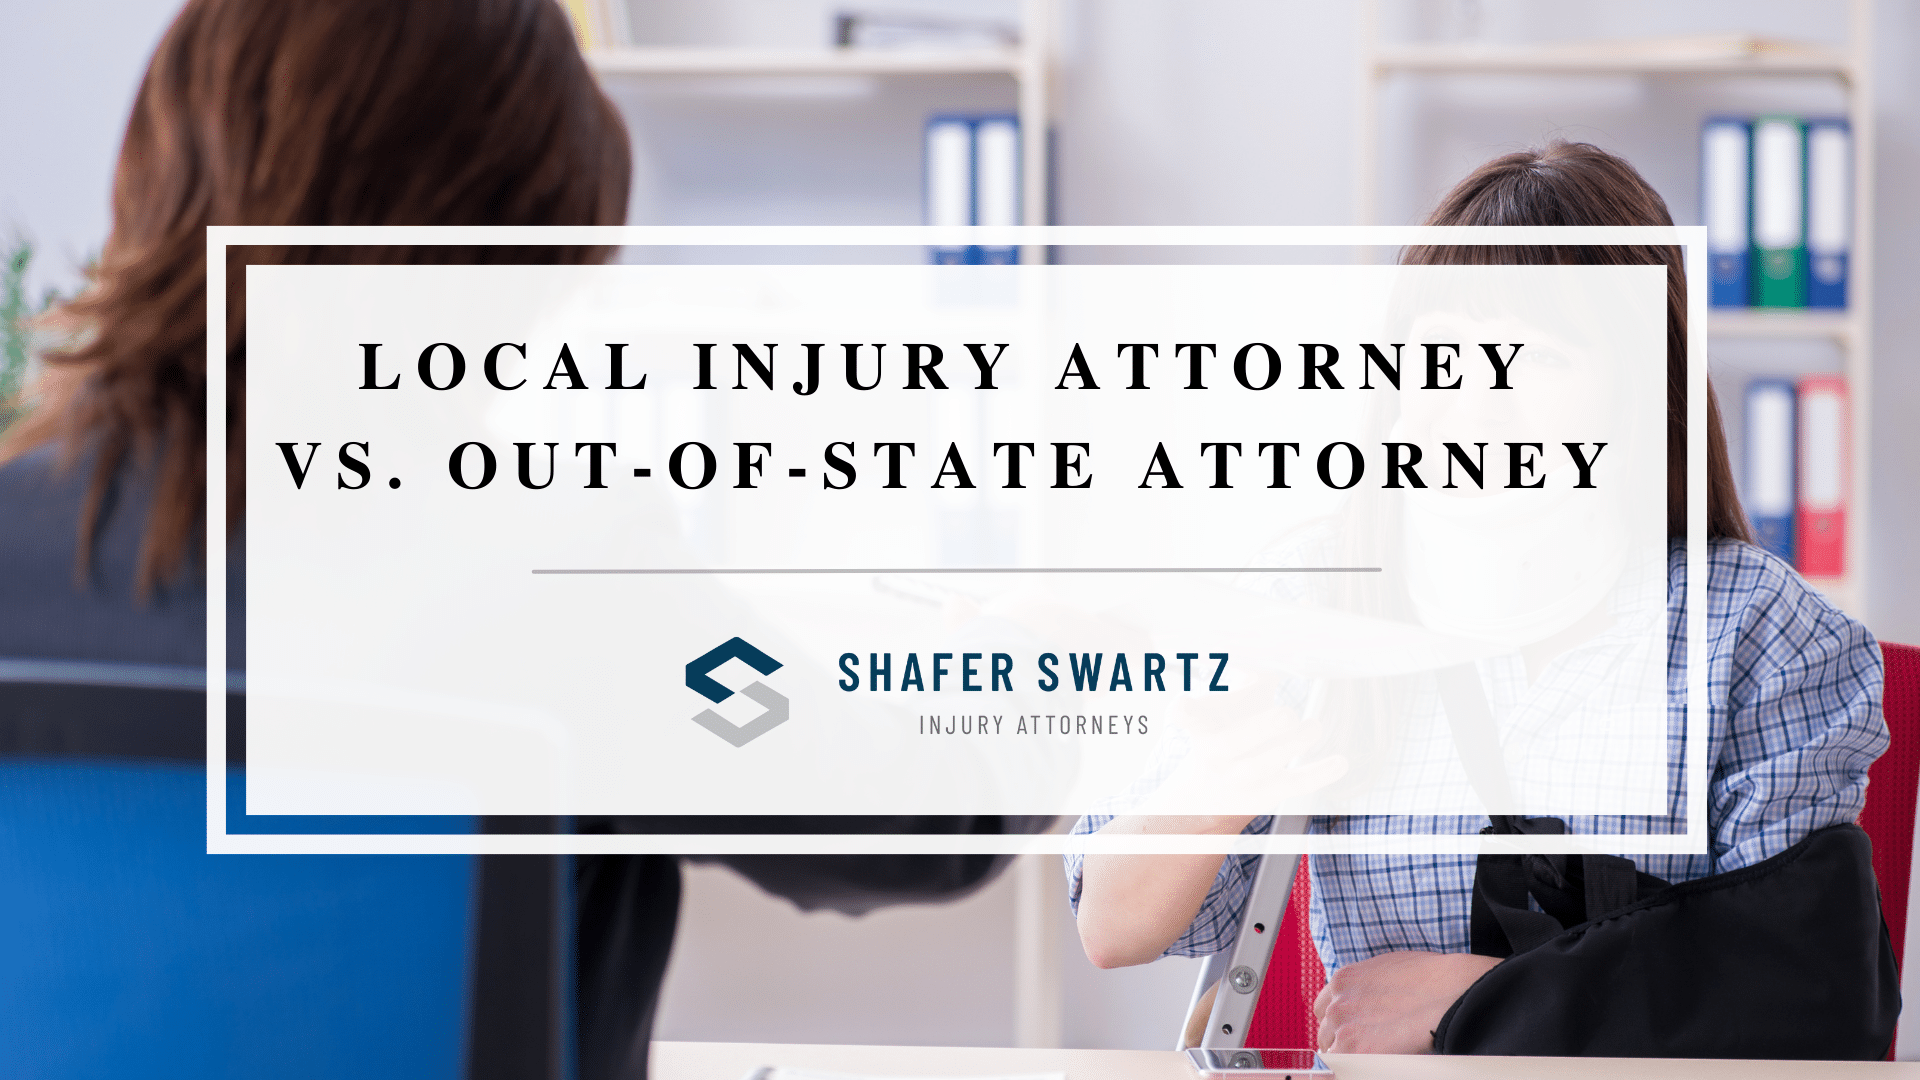 Featured image of local injury attorney vs. out-of-state